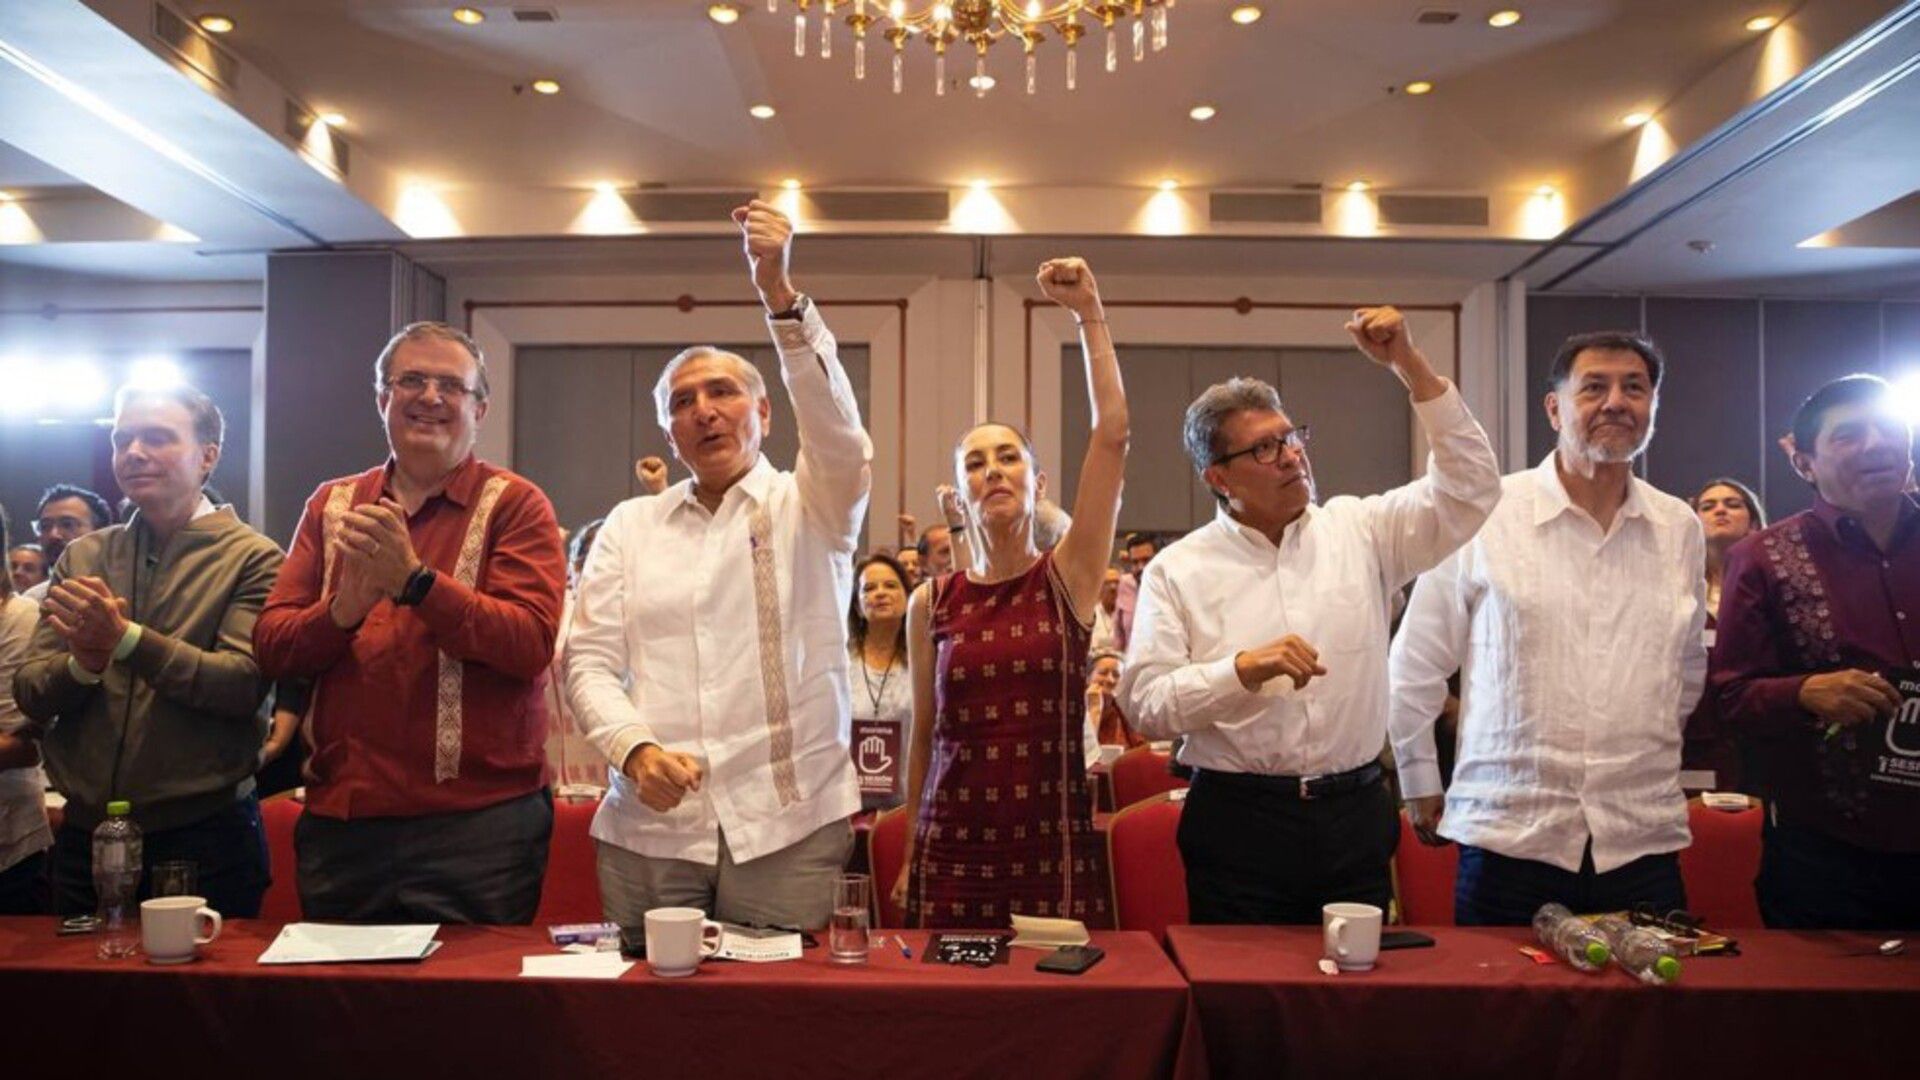 The and the candidates for the presidential candidacy of Morena.  From left to right: Manuel Velasco, Marcelo Ebrard, Adán Augusto López, Claudia Sheinbaum, Ricardo Monreal and Gerardo Fernández Noroña.  Photo: Special